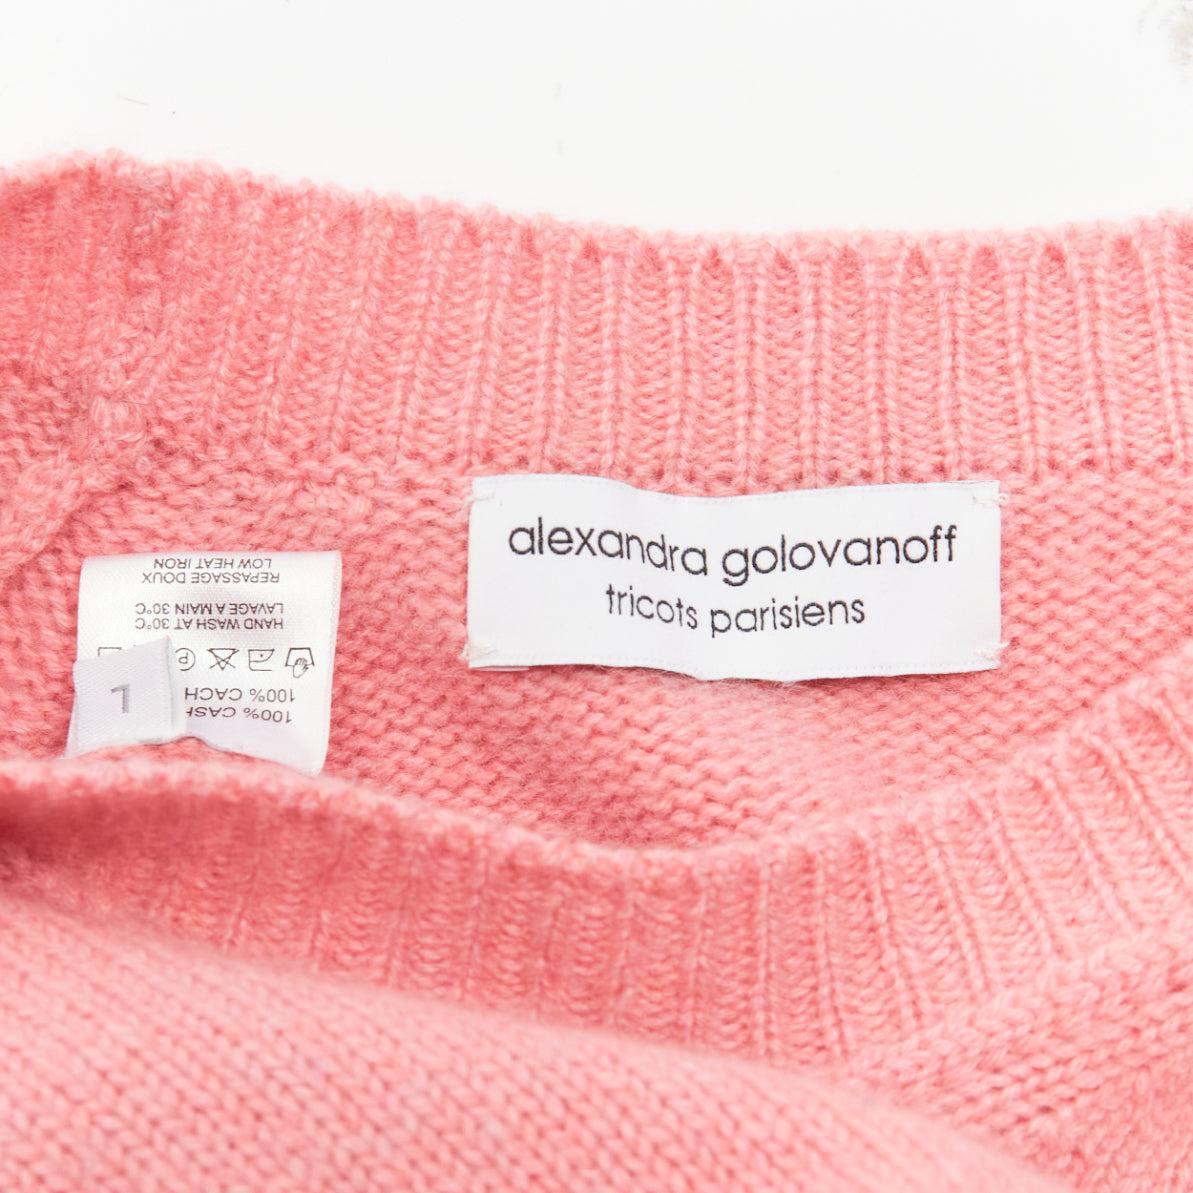 ALEXANDRA GOLOVANOFF Tricot Parisiens 100% cashmere pink long sleeve sweater L For Sale 4